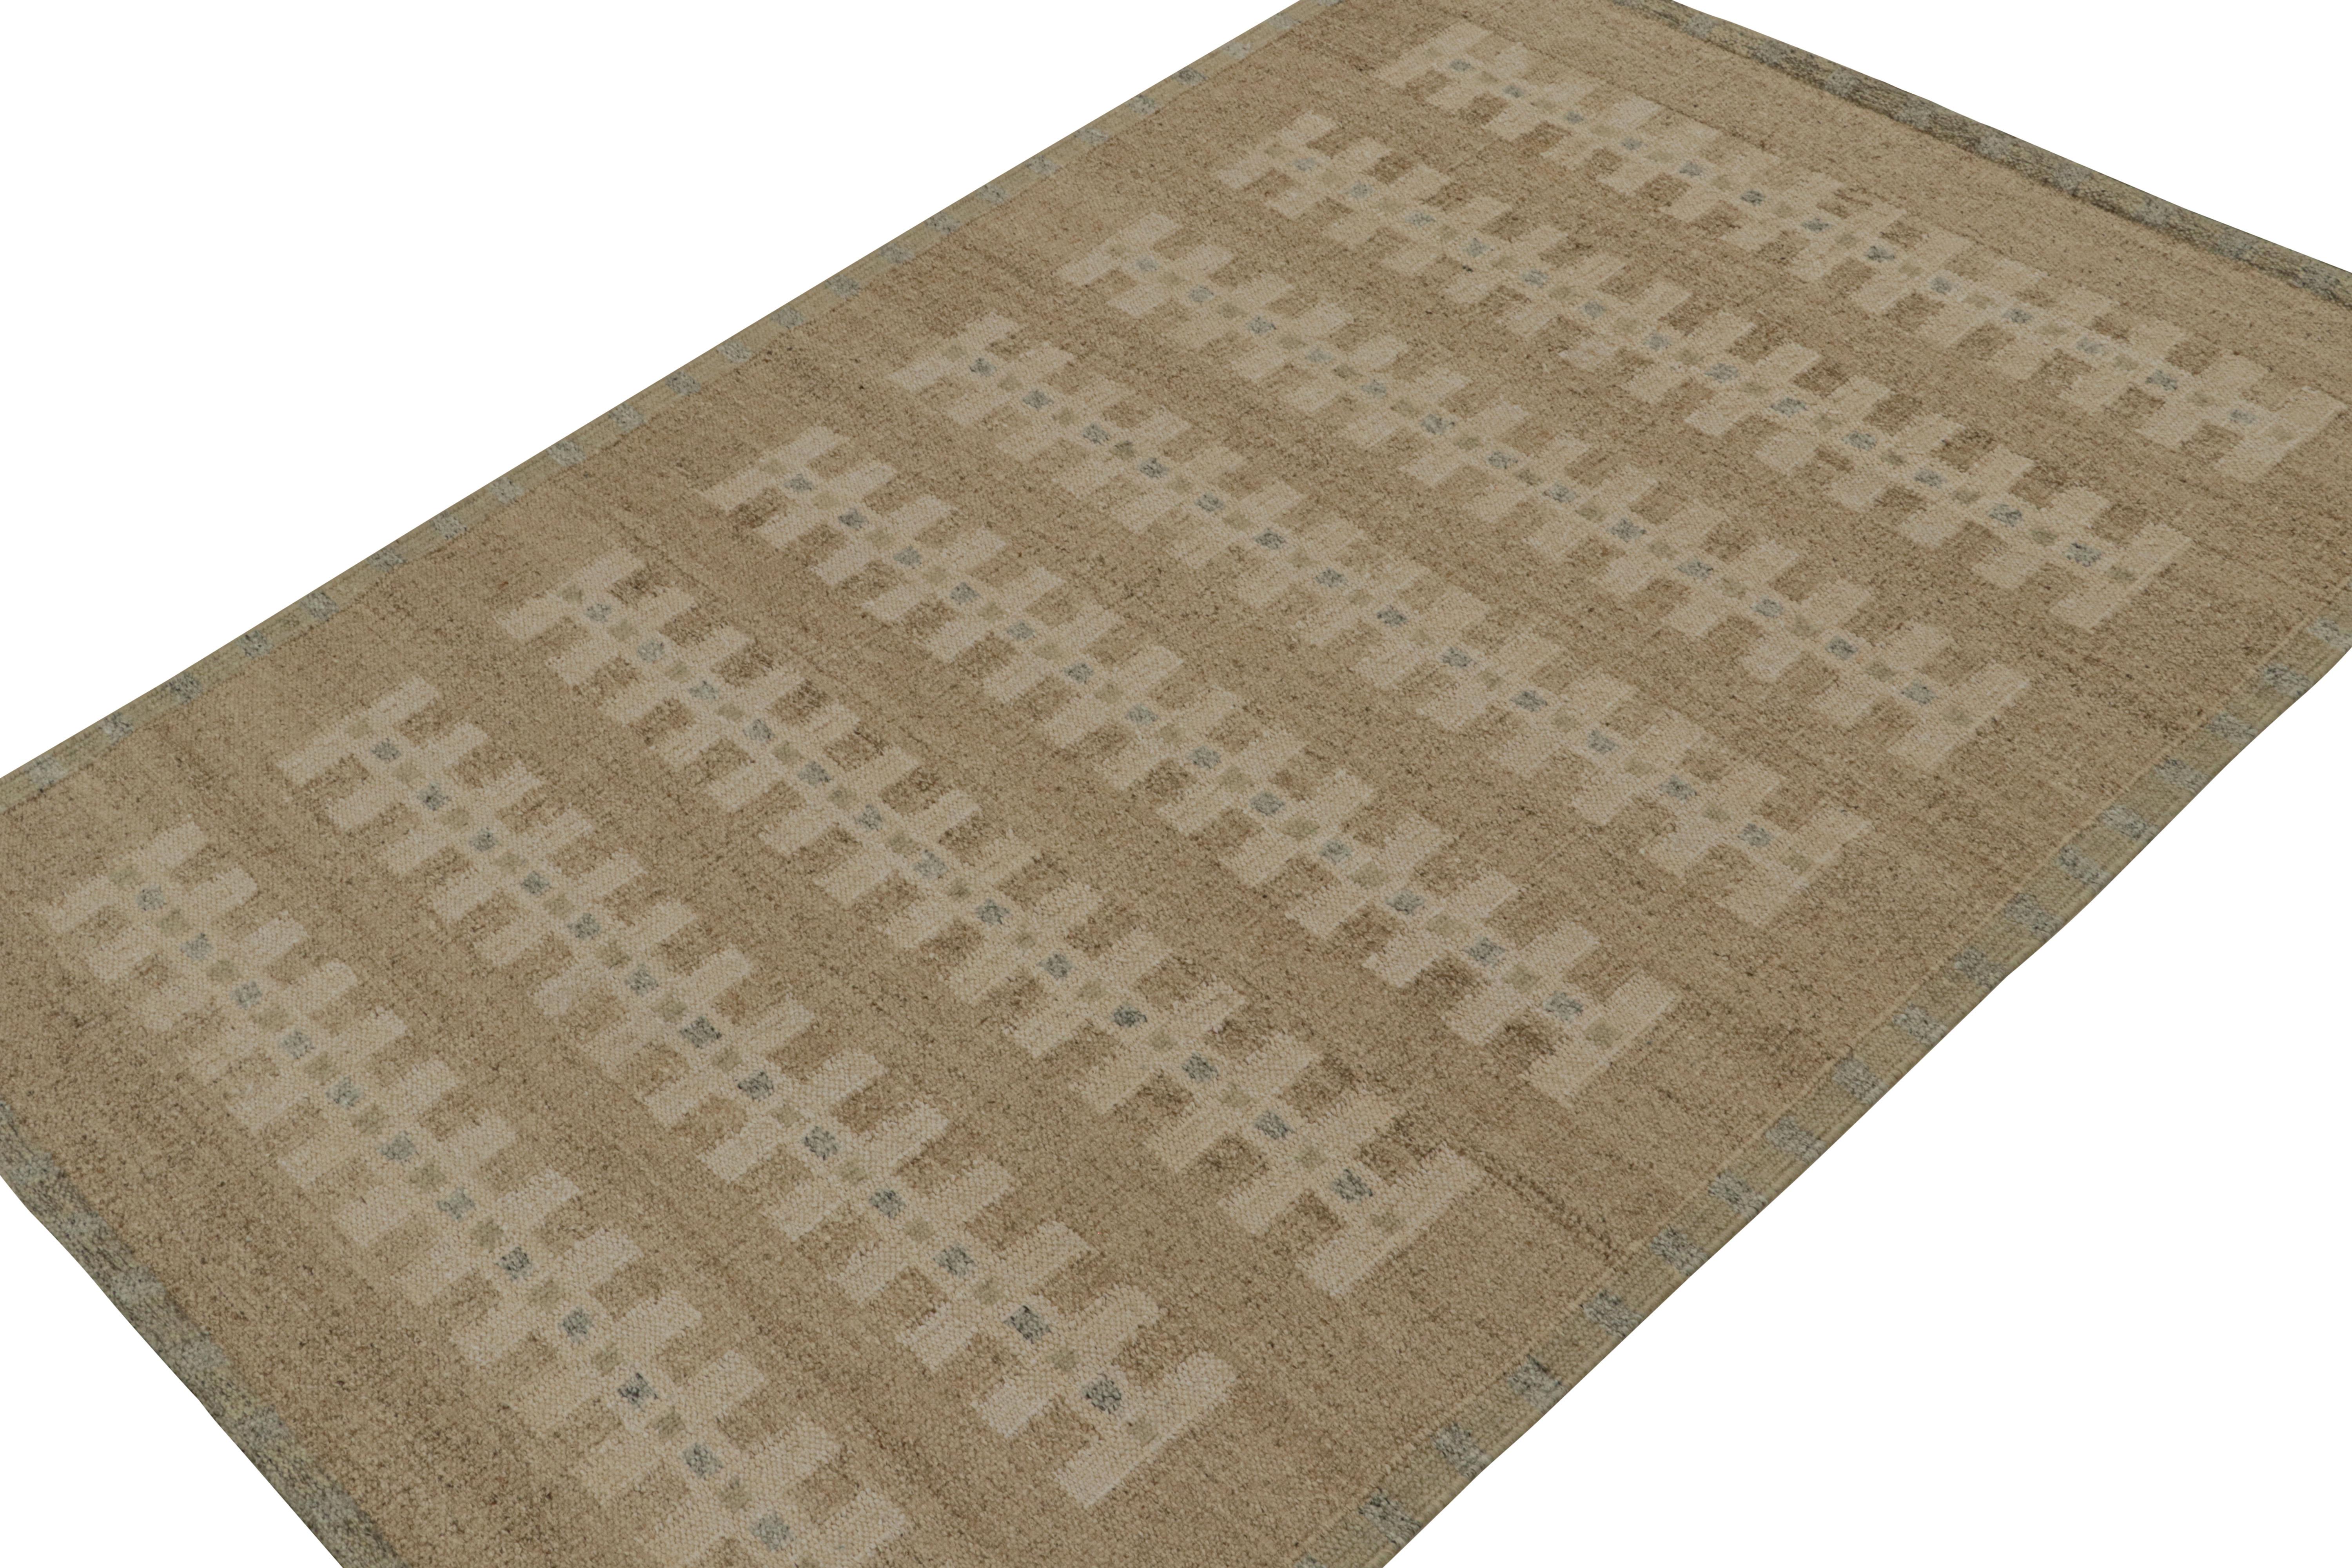 This 6x9 Swedish style kilim is from the Scandinavian rug collection by Rug & Kilim. Handwoven in wool, cotton and natural yarns, this flatweave represents a contemporary take on Swedish Deco Rollakans and Rya rugs.

On the Design: 

This rug enjoys